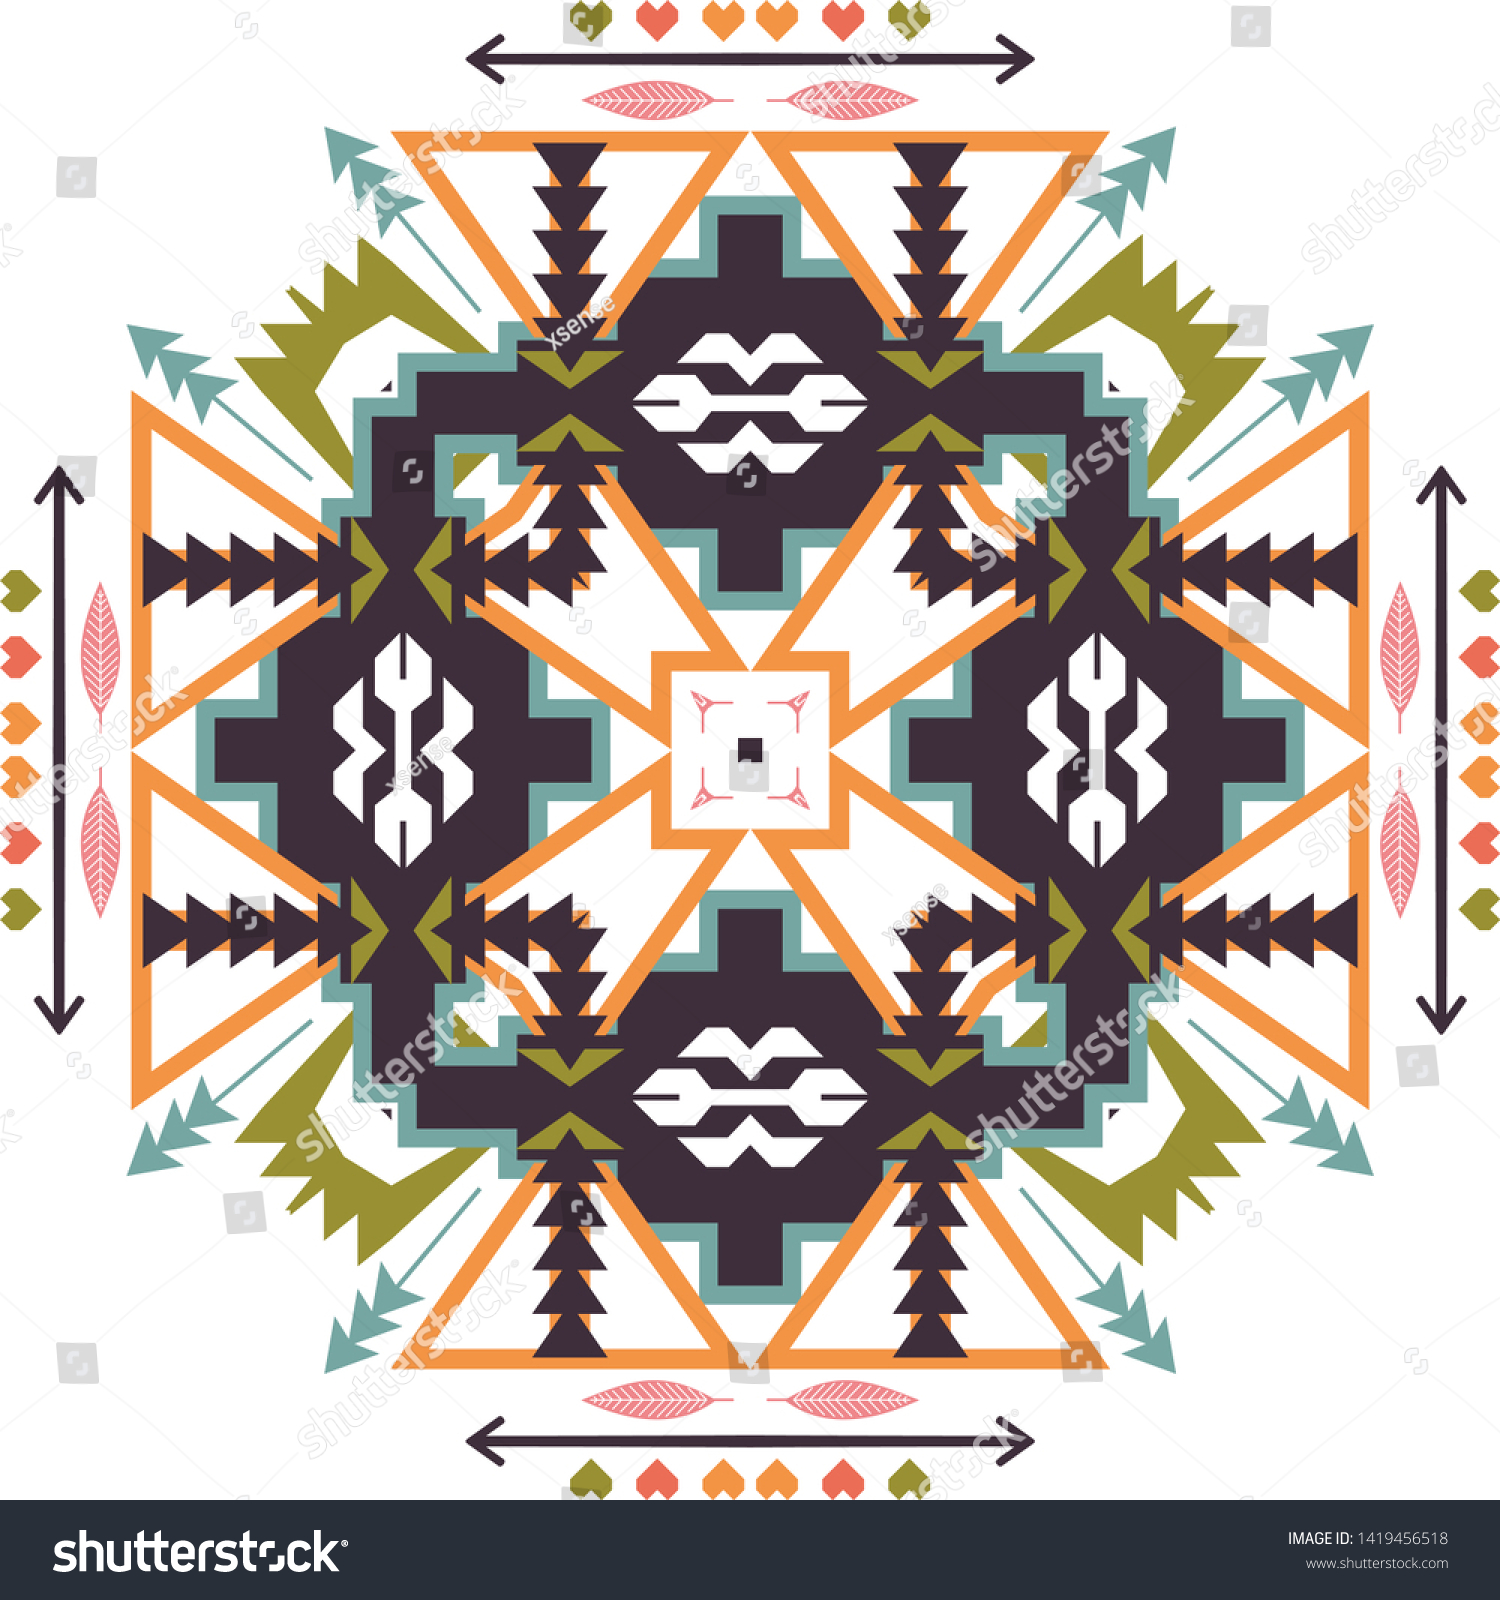 SVG of Traditional Romanian folk art knitted embroidery pattern.  svg